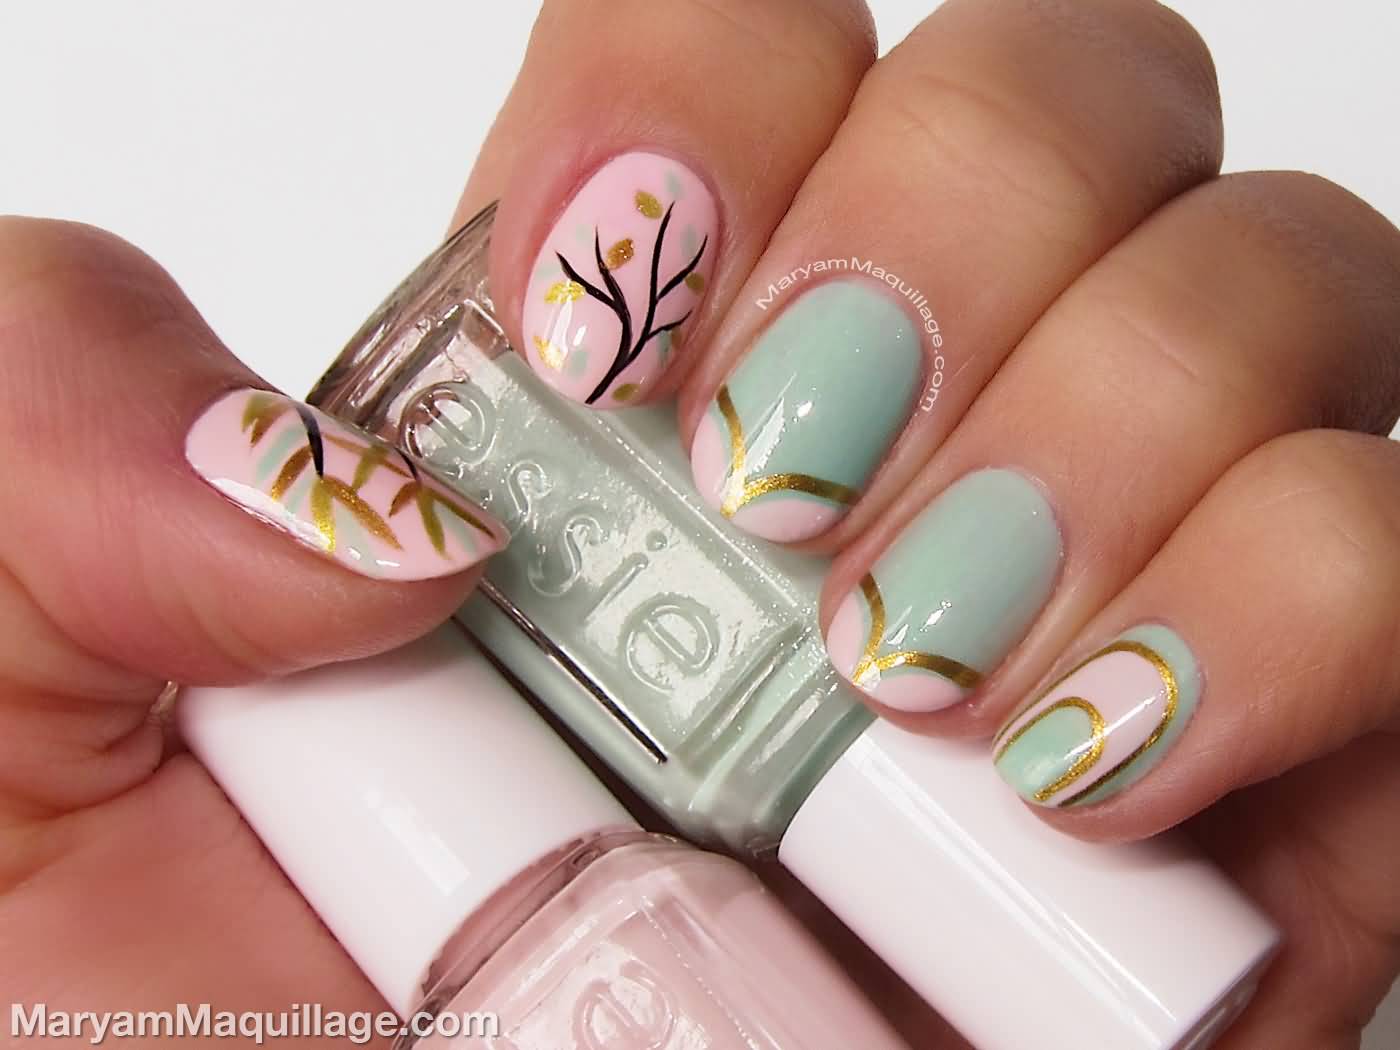 Pastel Nail Art With Golden Stripes And Tree Design